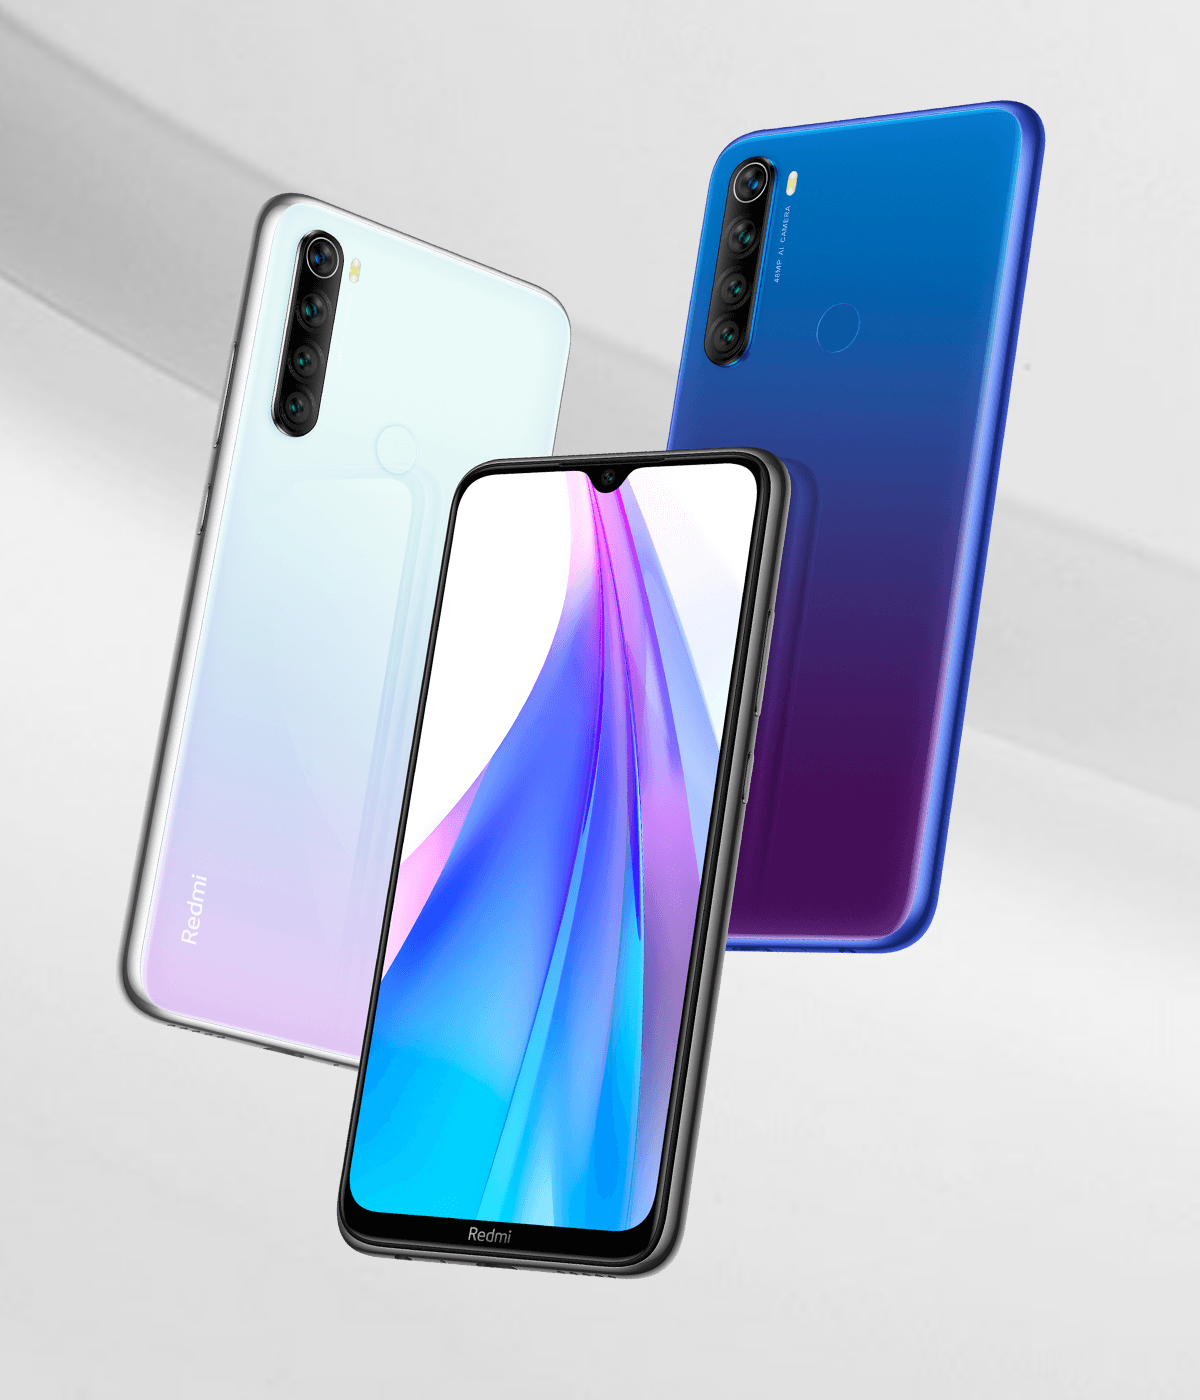 MIUI 12 is coming to the Xiaomi Redmi Note 8T this month as reports of